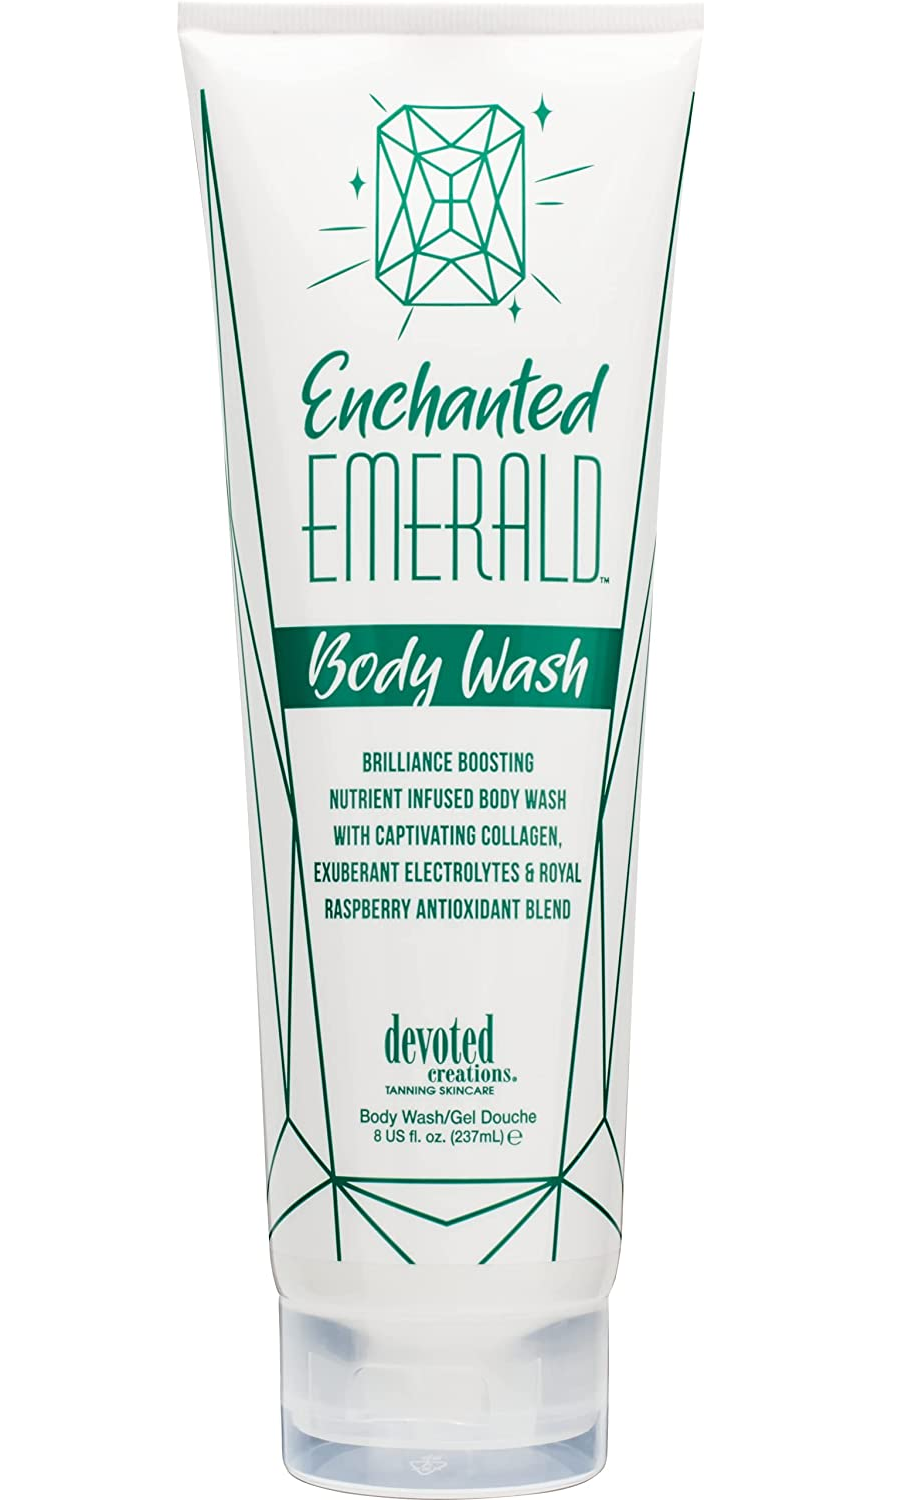 Primary image for Devoted Creations Enchanted Emerald Body Wash, 8 fl oz